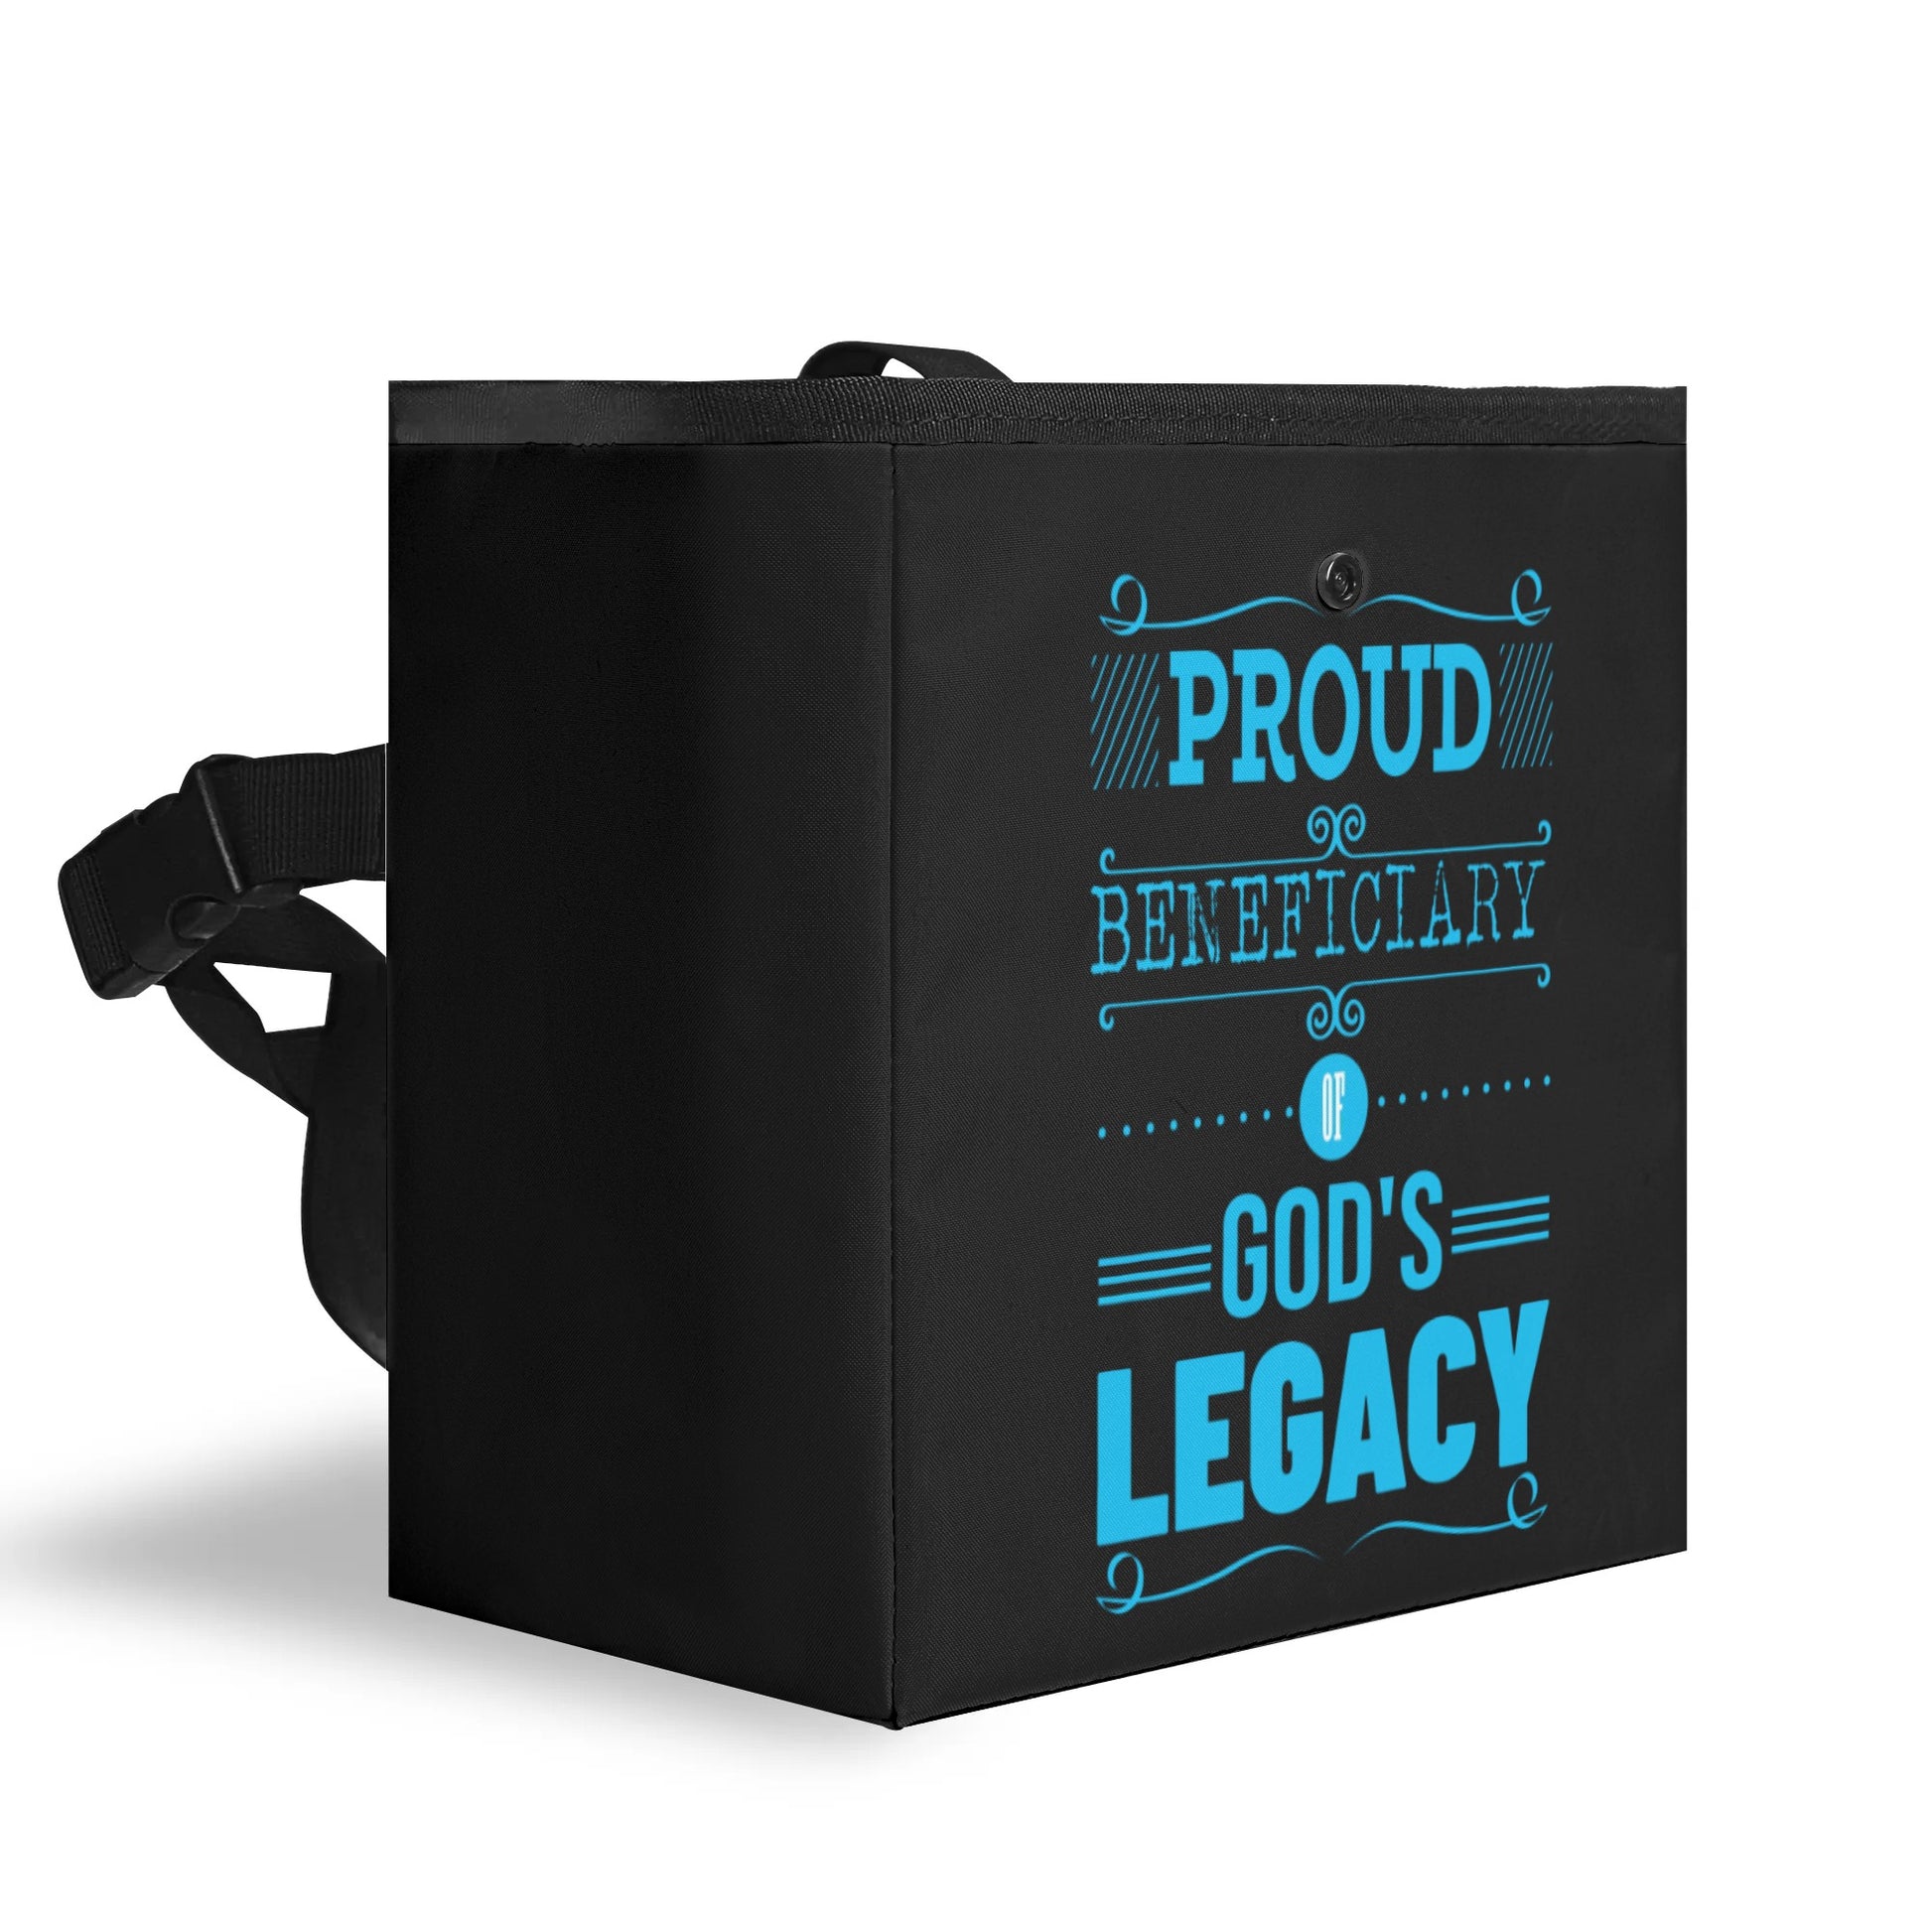 Proud Beneficiary Of Gods Legacy Hanging Storage Trash Car Organizer Bag Christian Car Accessories popcustoms